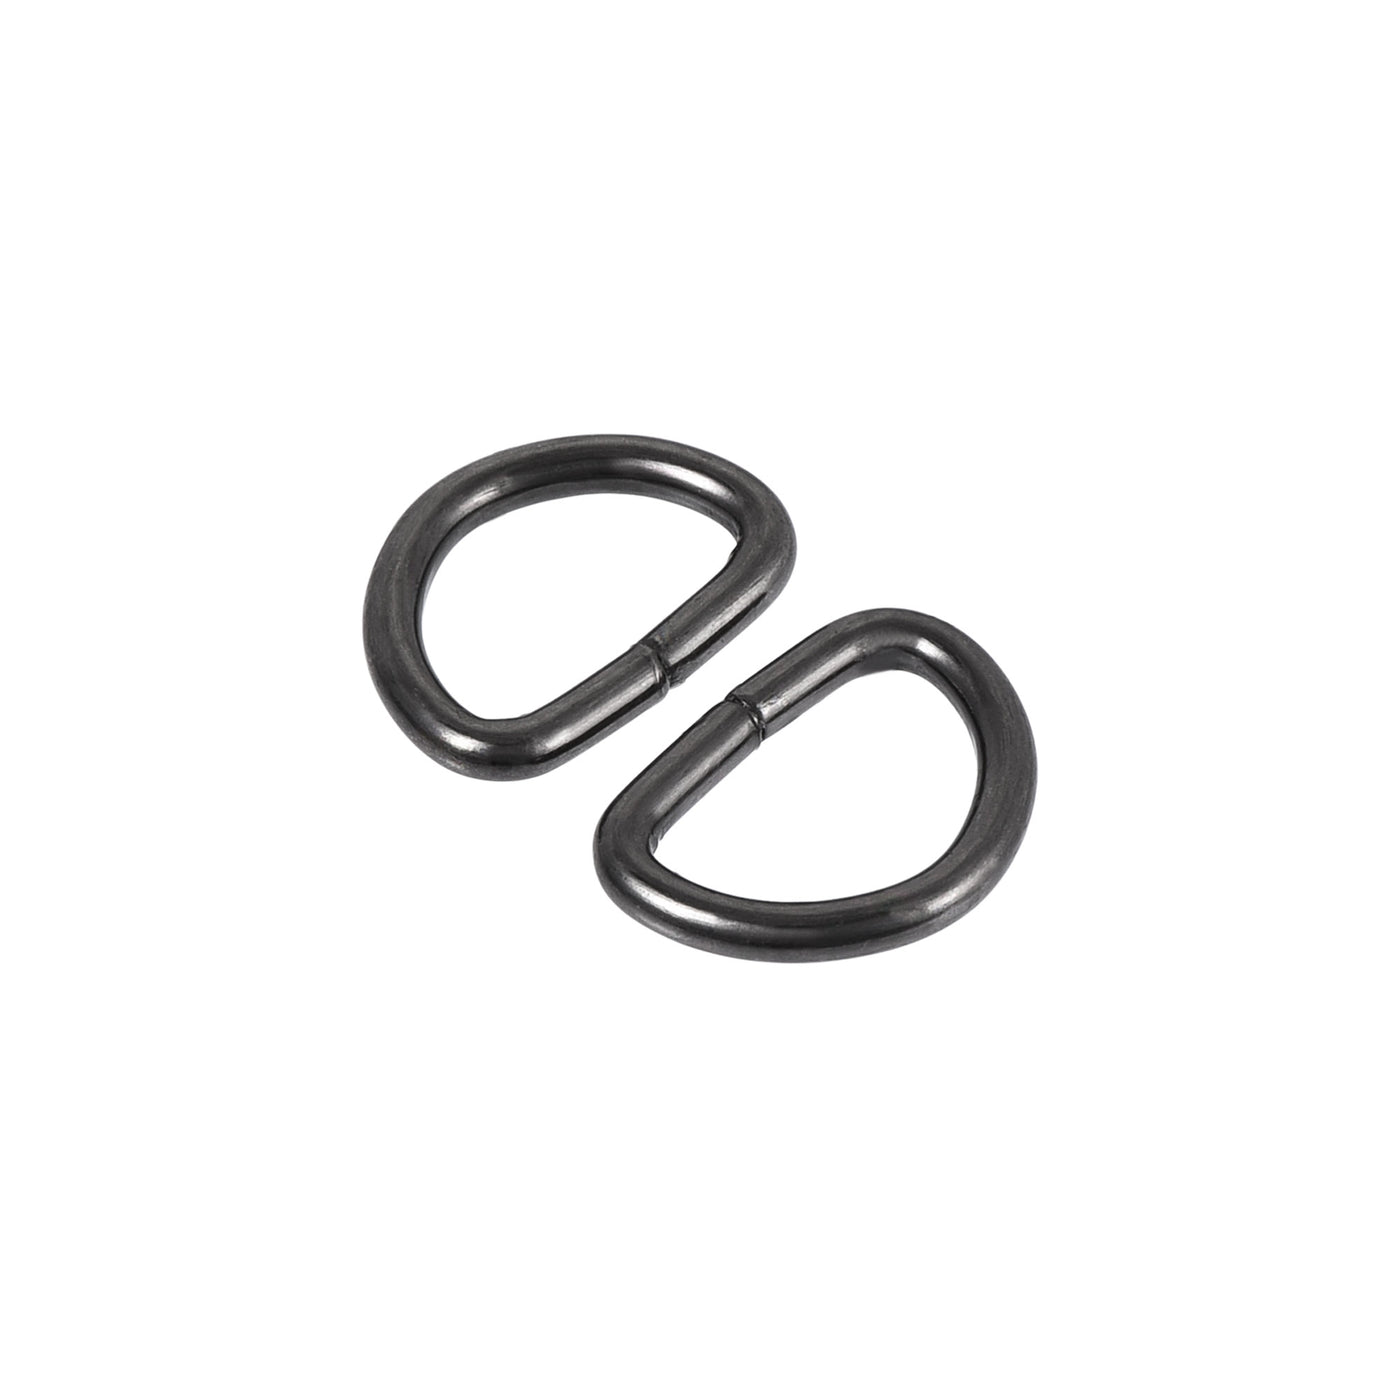 uxcell Uxcell Metal D Ring 0.39"(10mm) D-Rings Buckle for Hardware Bags Belts Craft DIY Accessories Black 100pcs